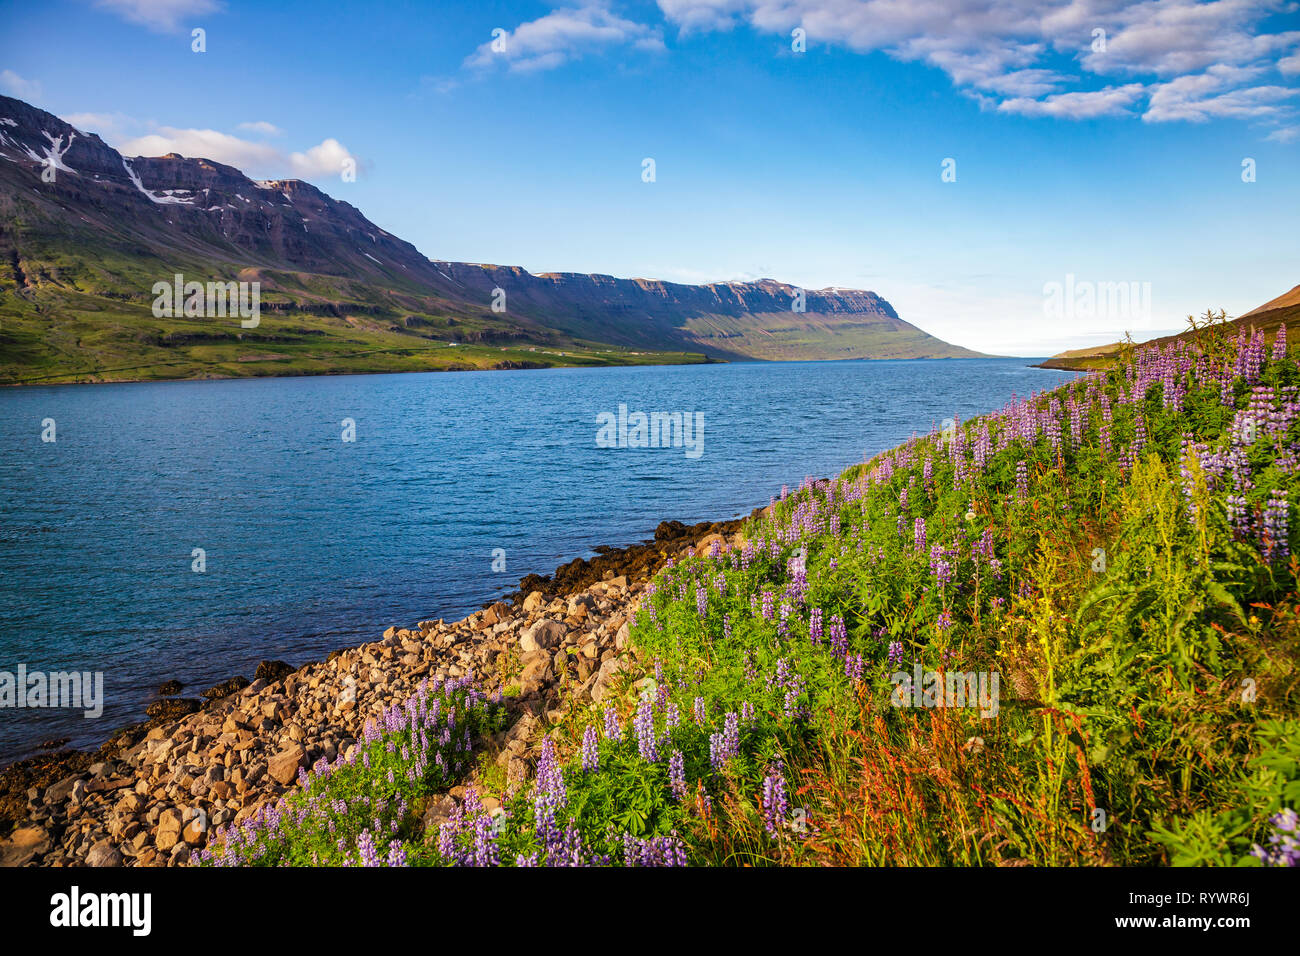 Wild Lupinus on a shore of scenic Seydisfjordur fjord in Eastern Iceland, Scandinavia Stock Photo